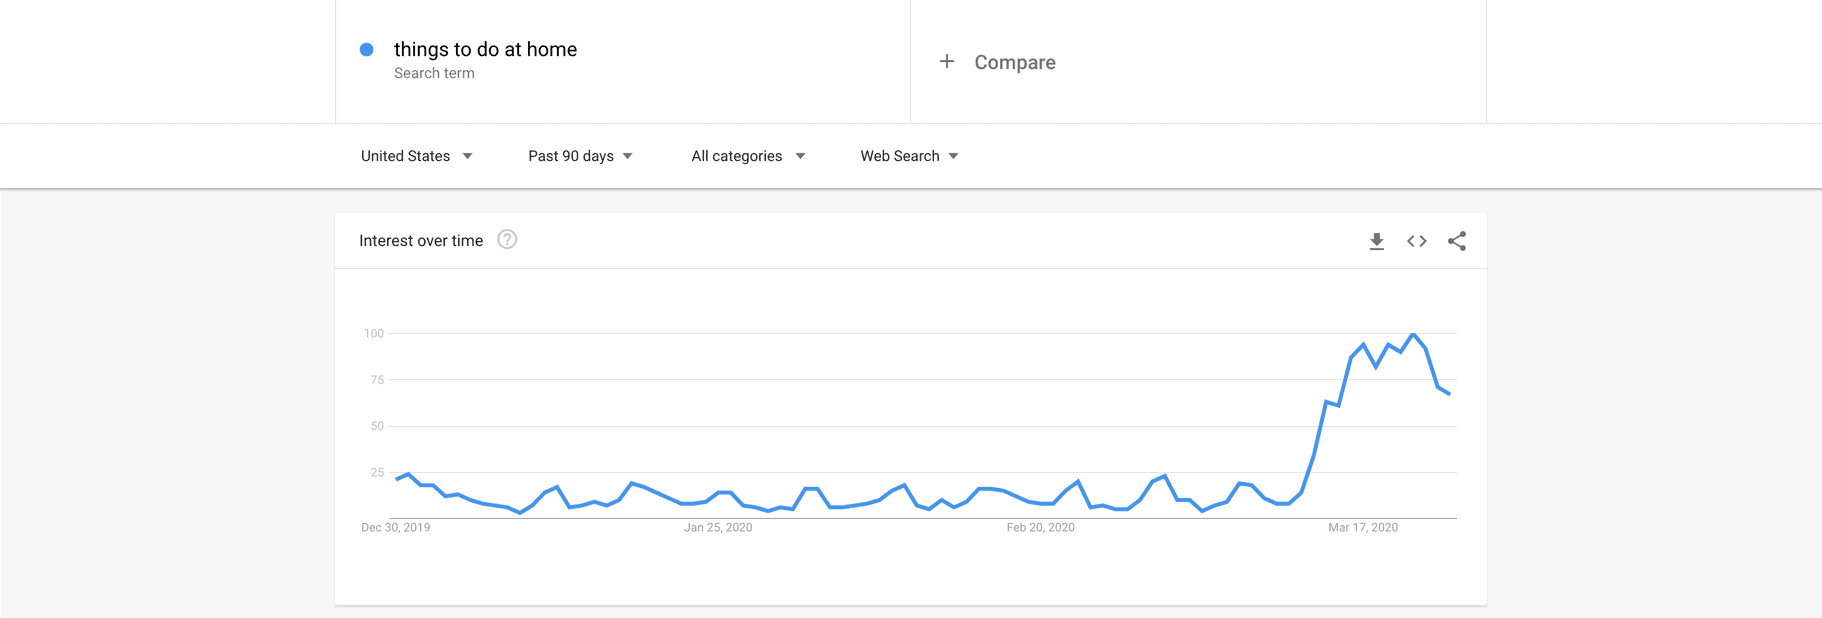 Google Trends showing things to do at home is trending